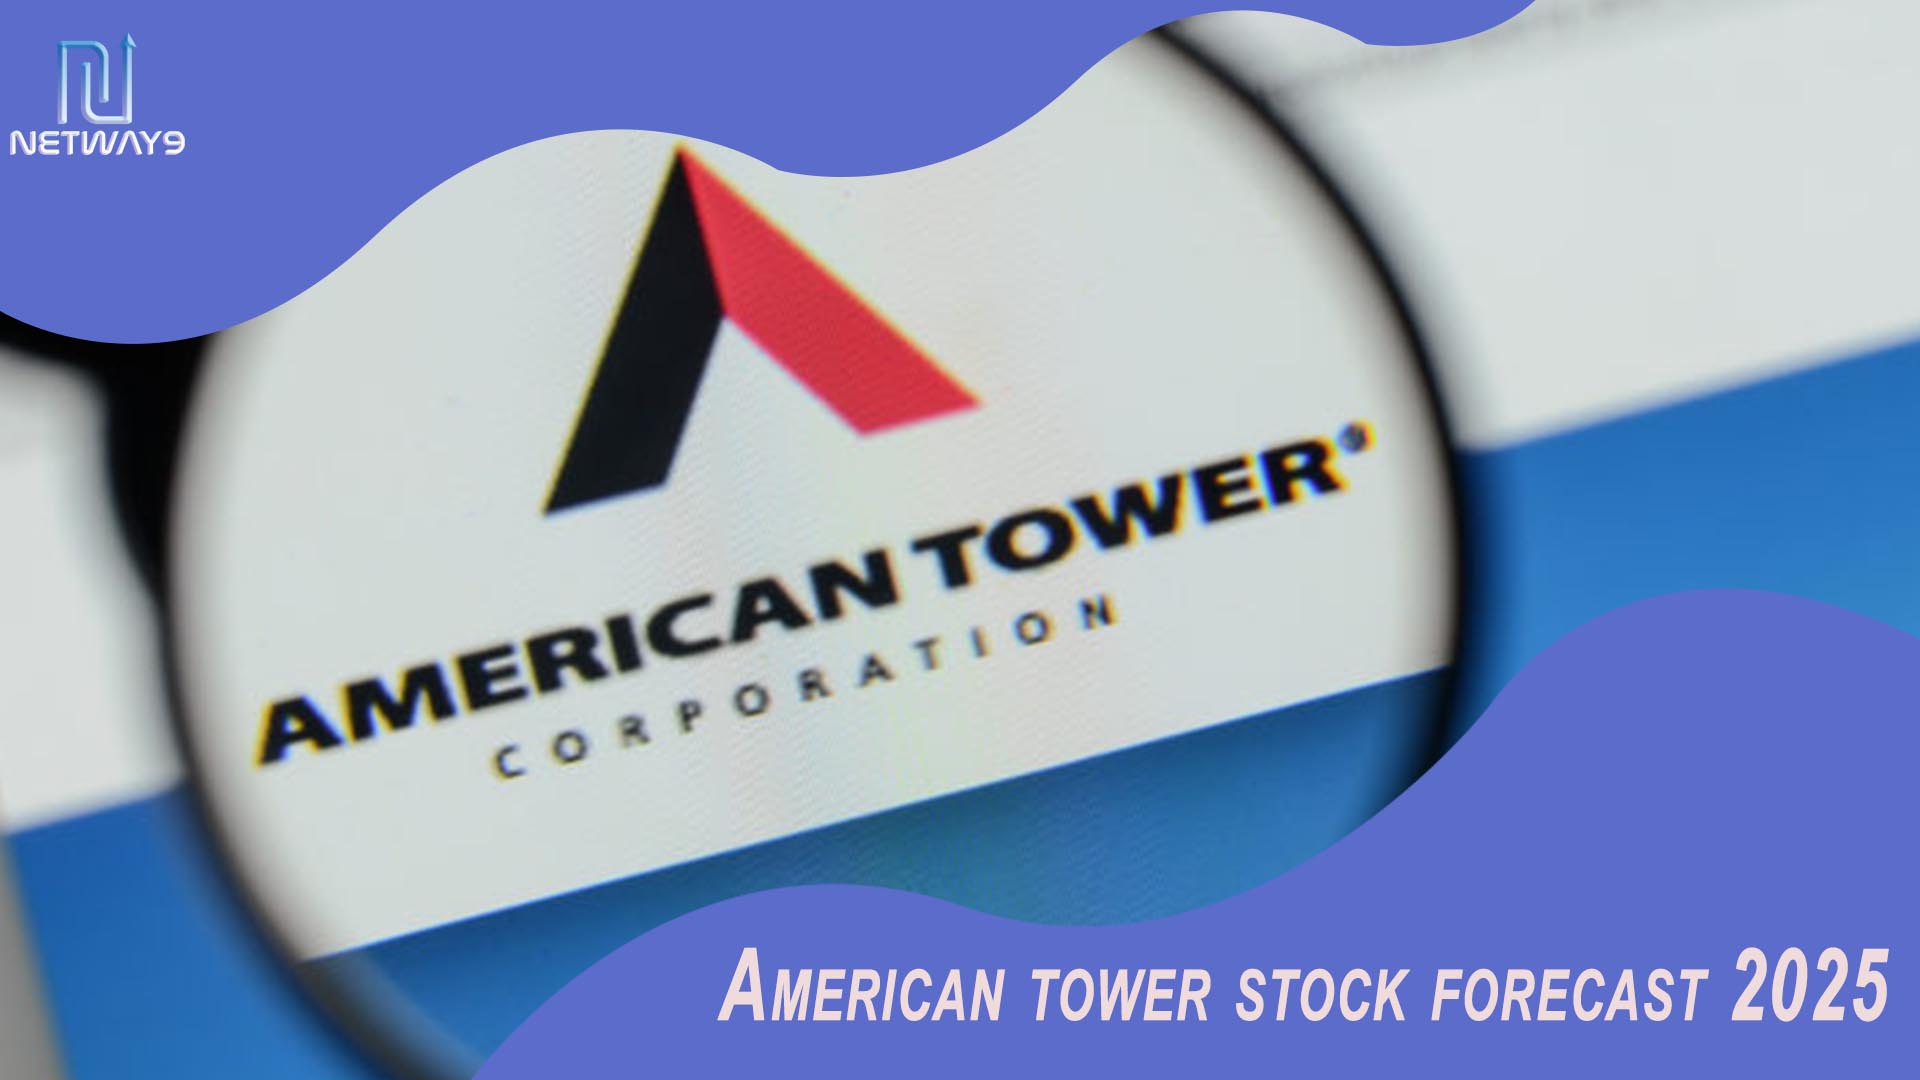 American tower stock forecast 2025